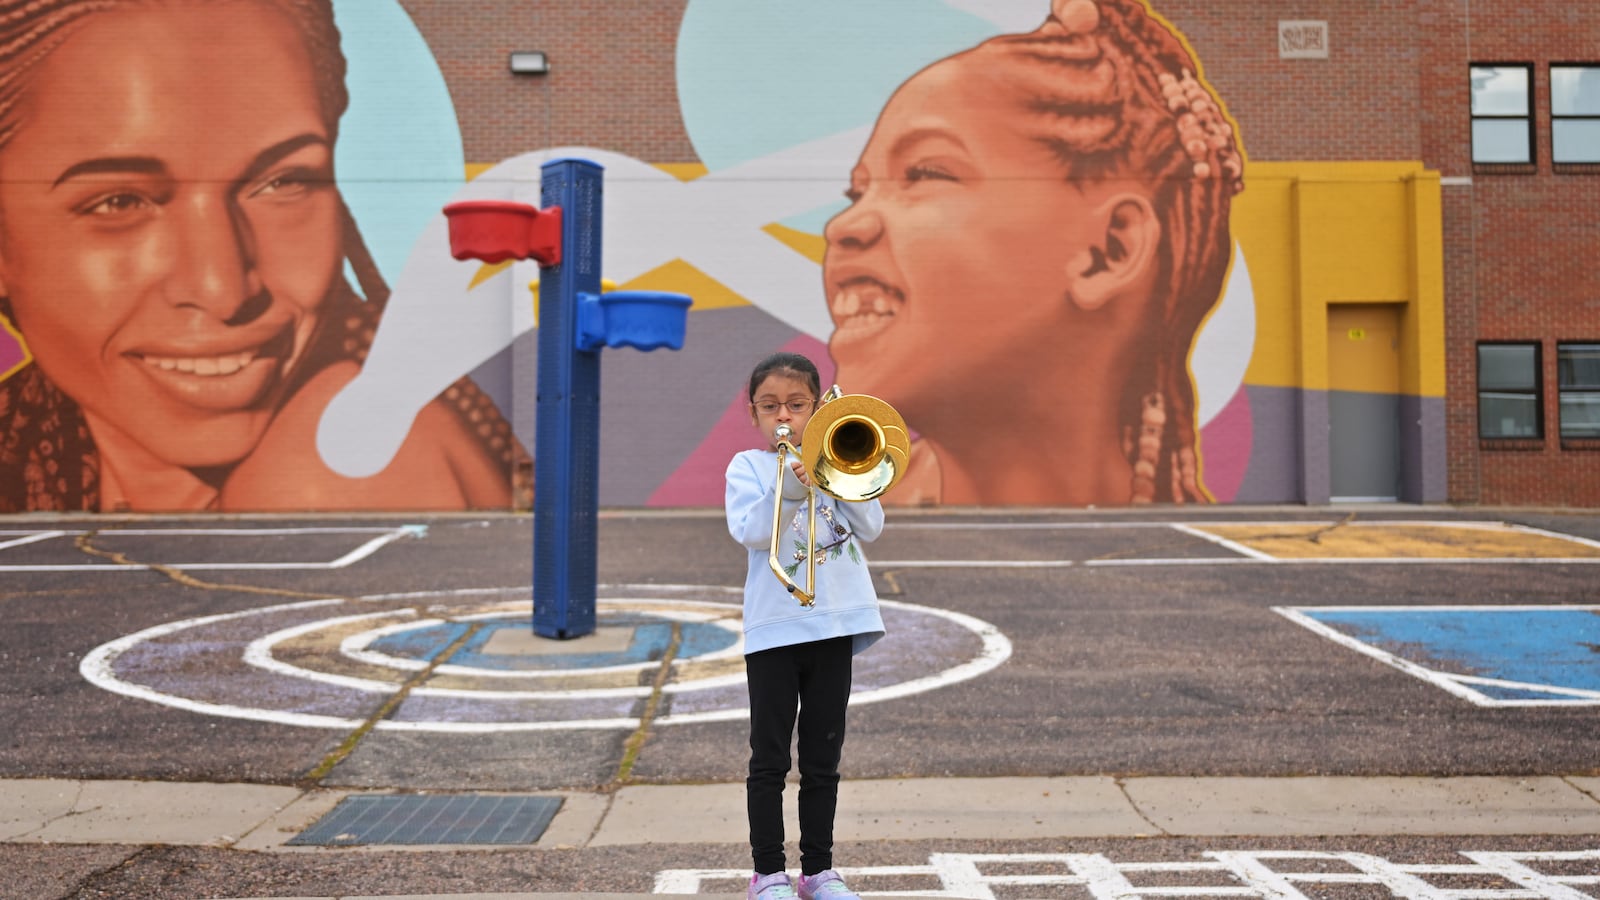 A young student plays the trombone on a sidewalk outside in front of a mural and playground.